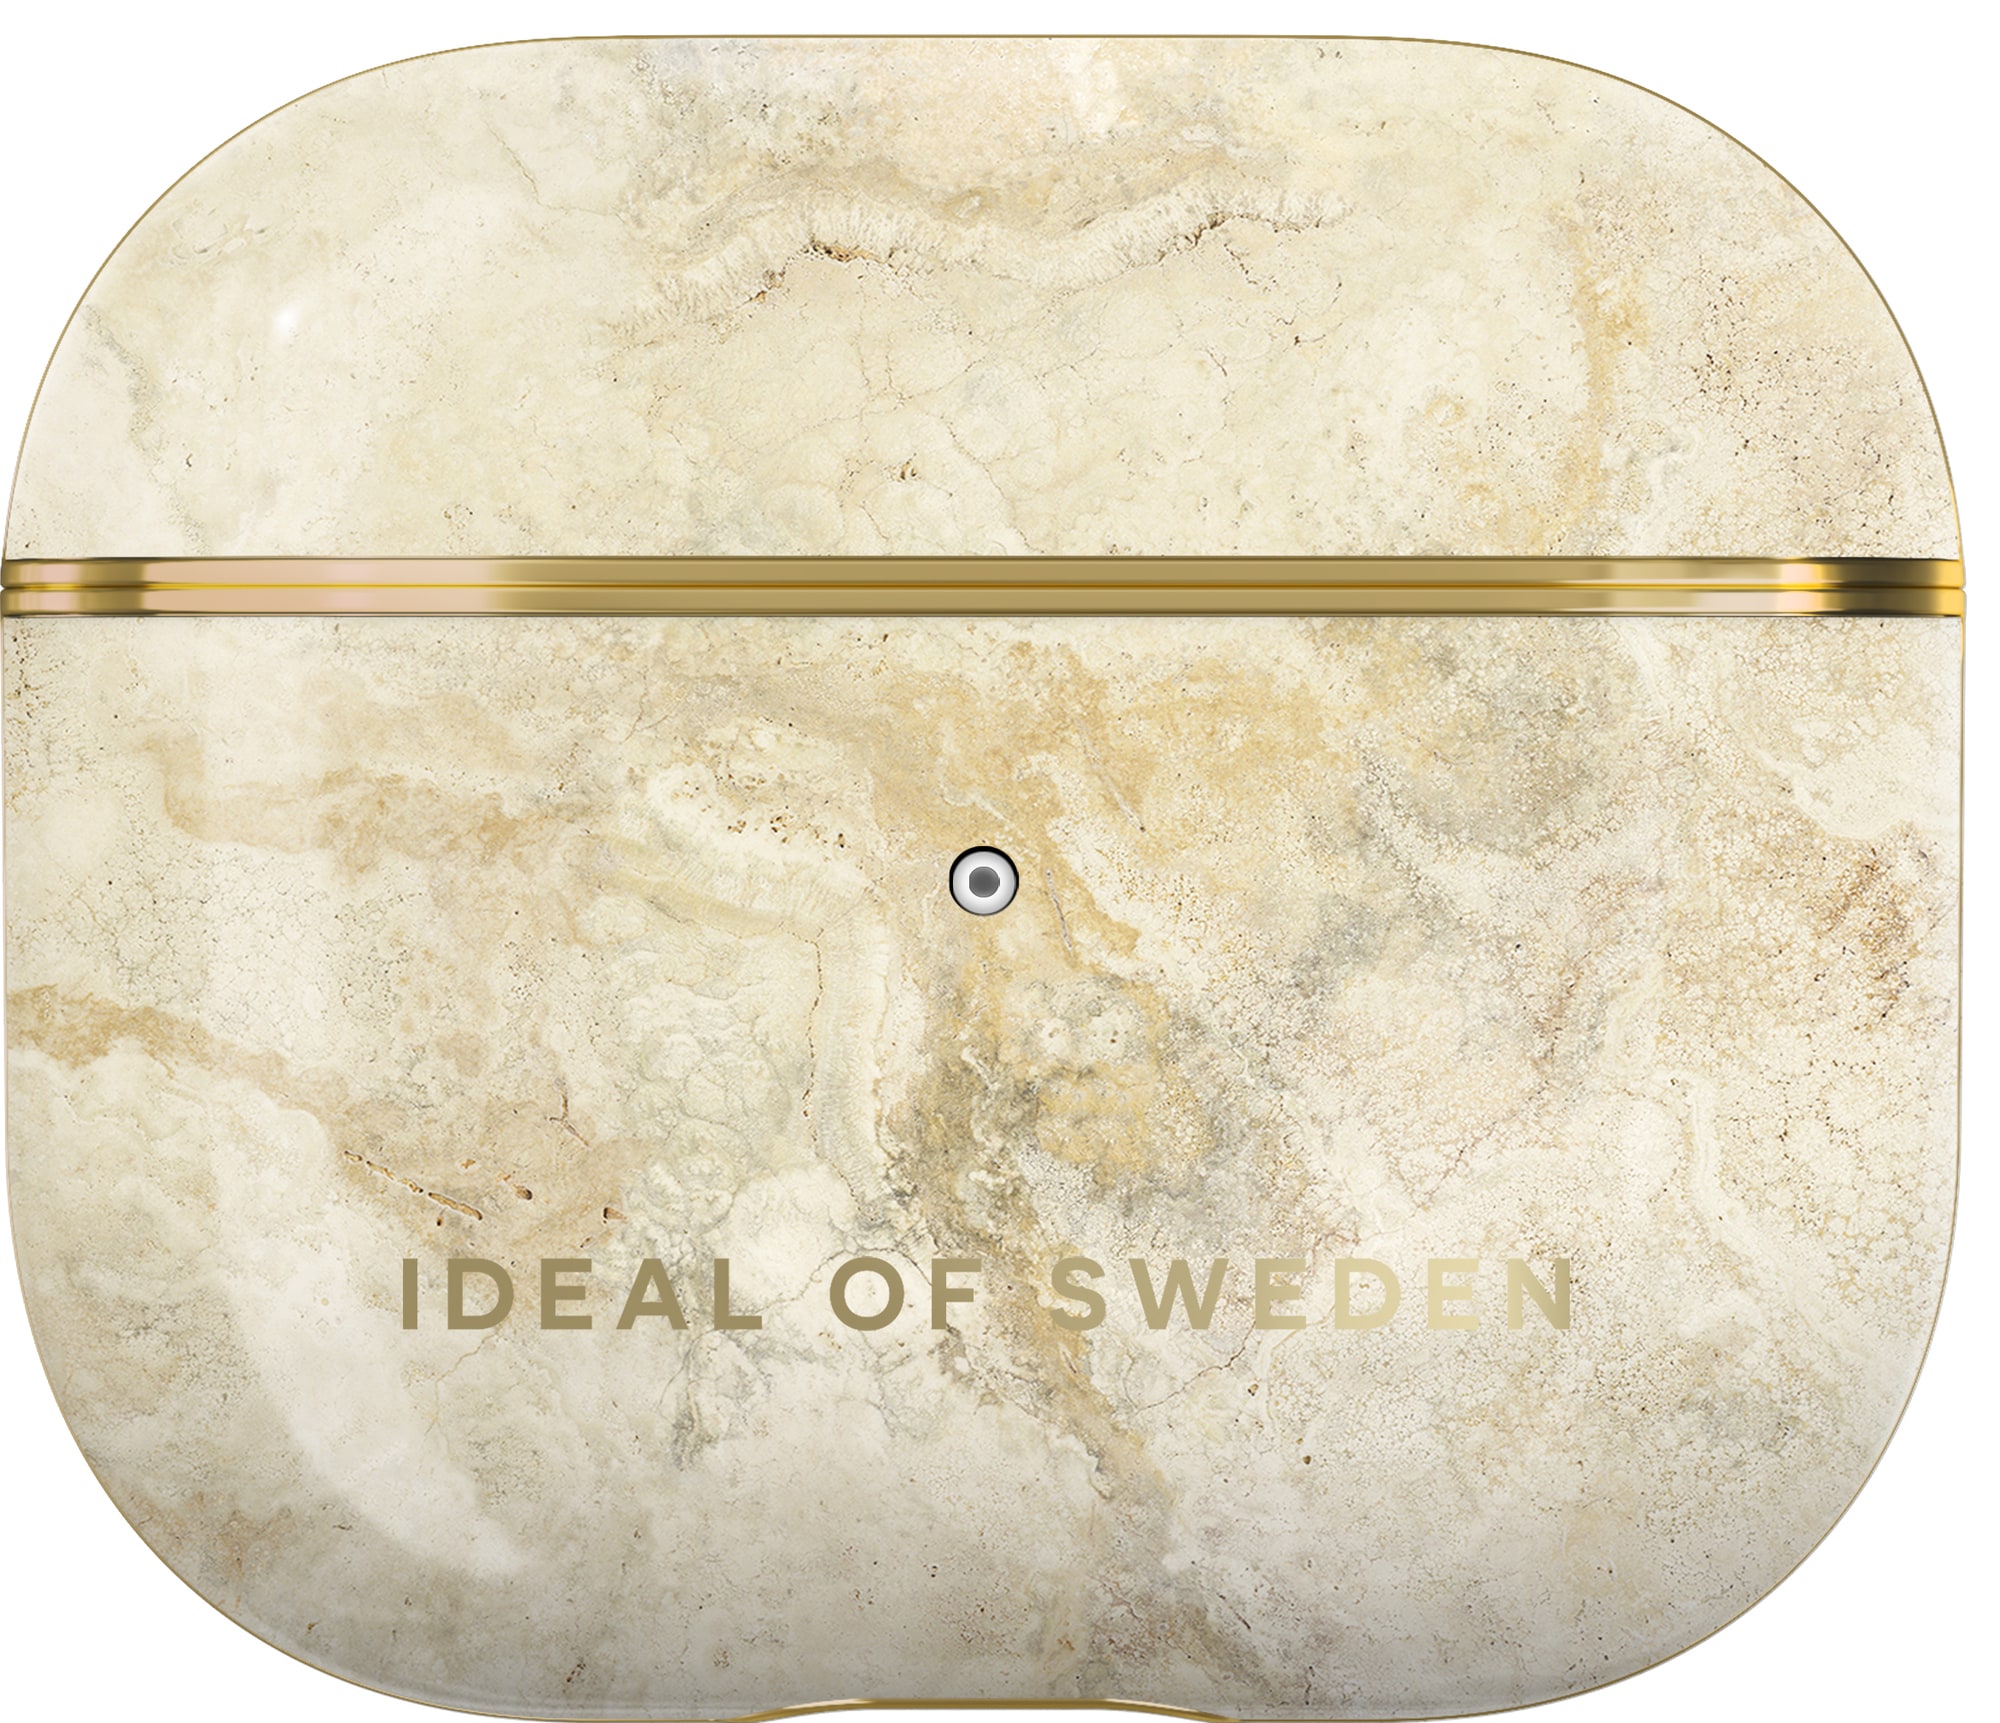 Ideal of Sweden Printed Airpod Case, Airpod 3, Carrara Gold Marble | Ideal of Sweden | Ideal of Sweden